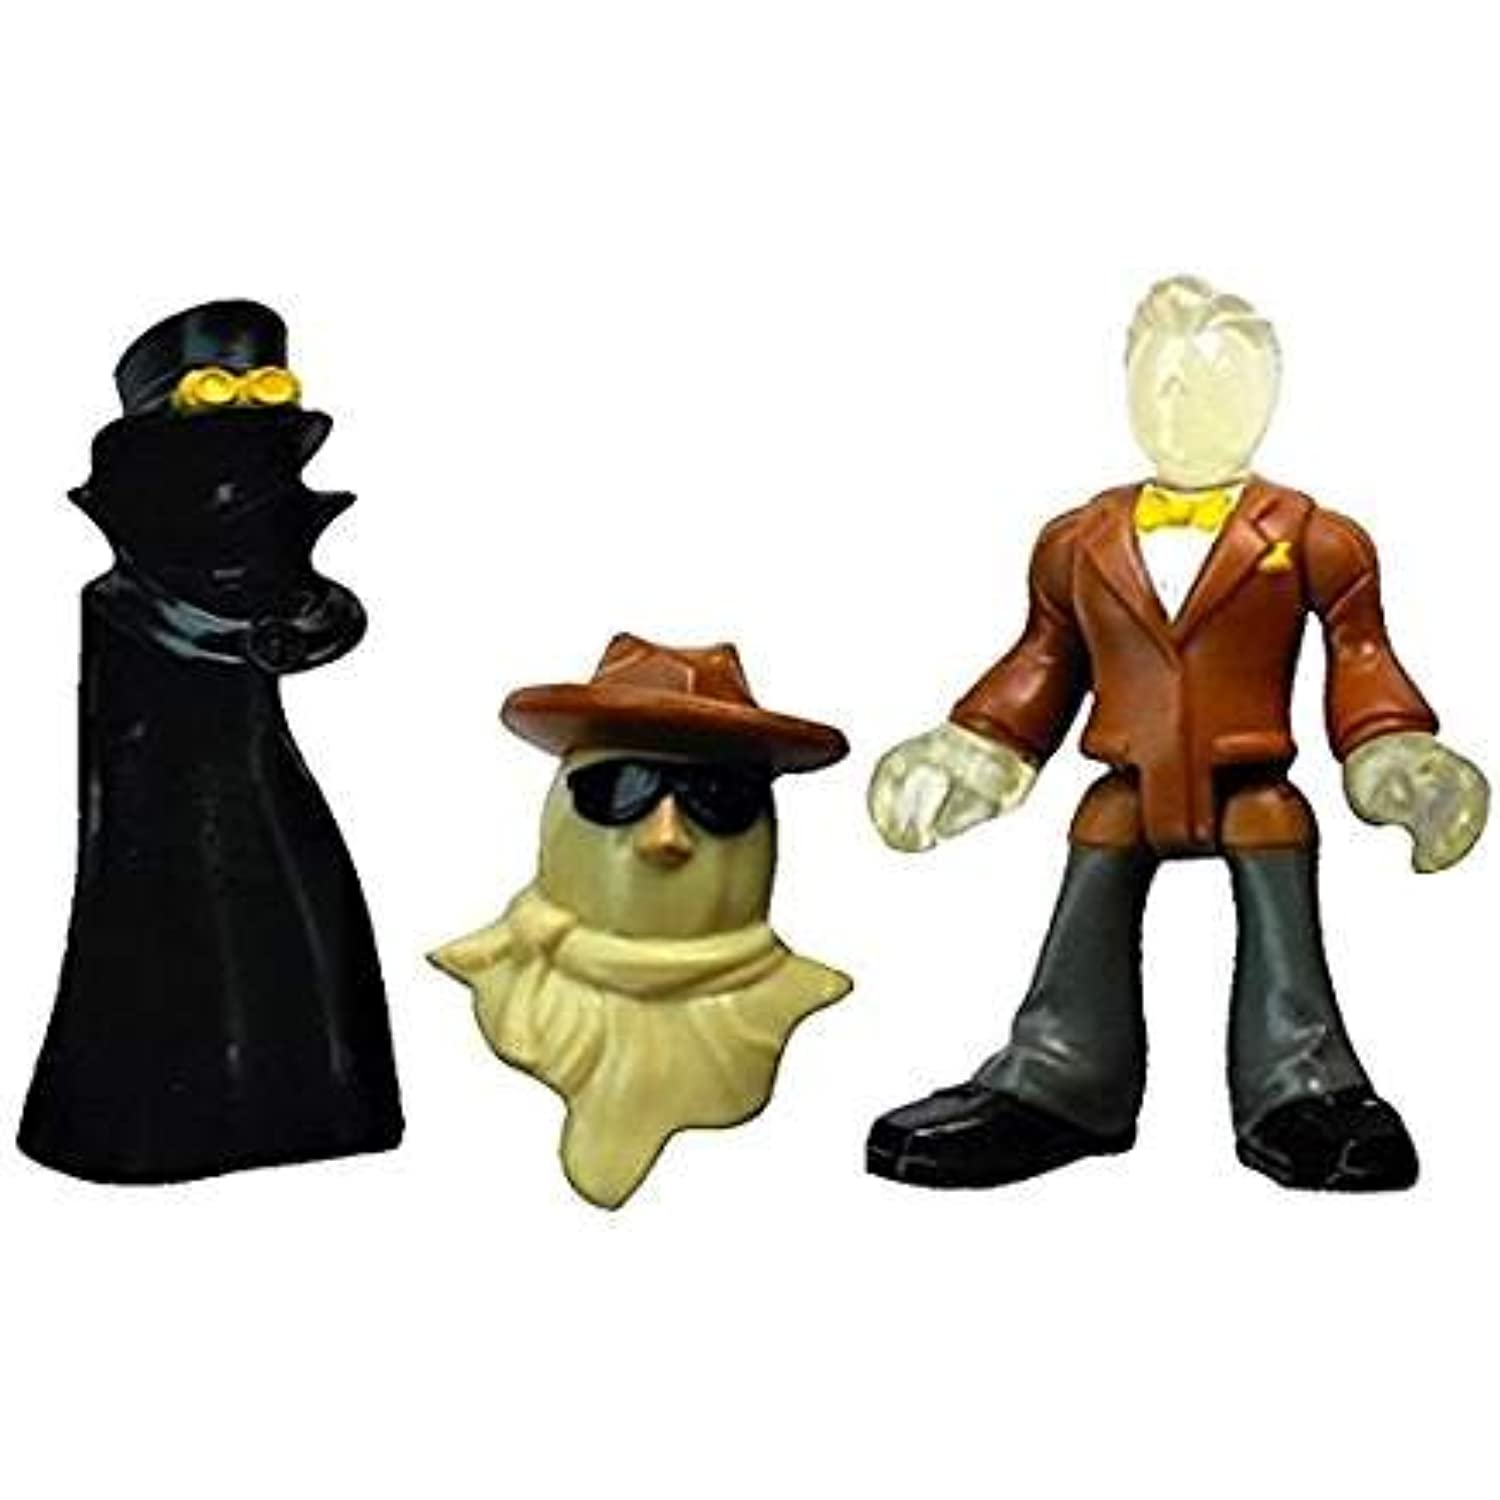 Invisible Man Series 9 Blind Bag Imaginext 2.5" Factory Sealed